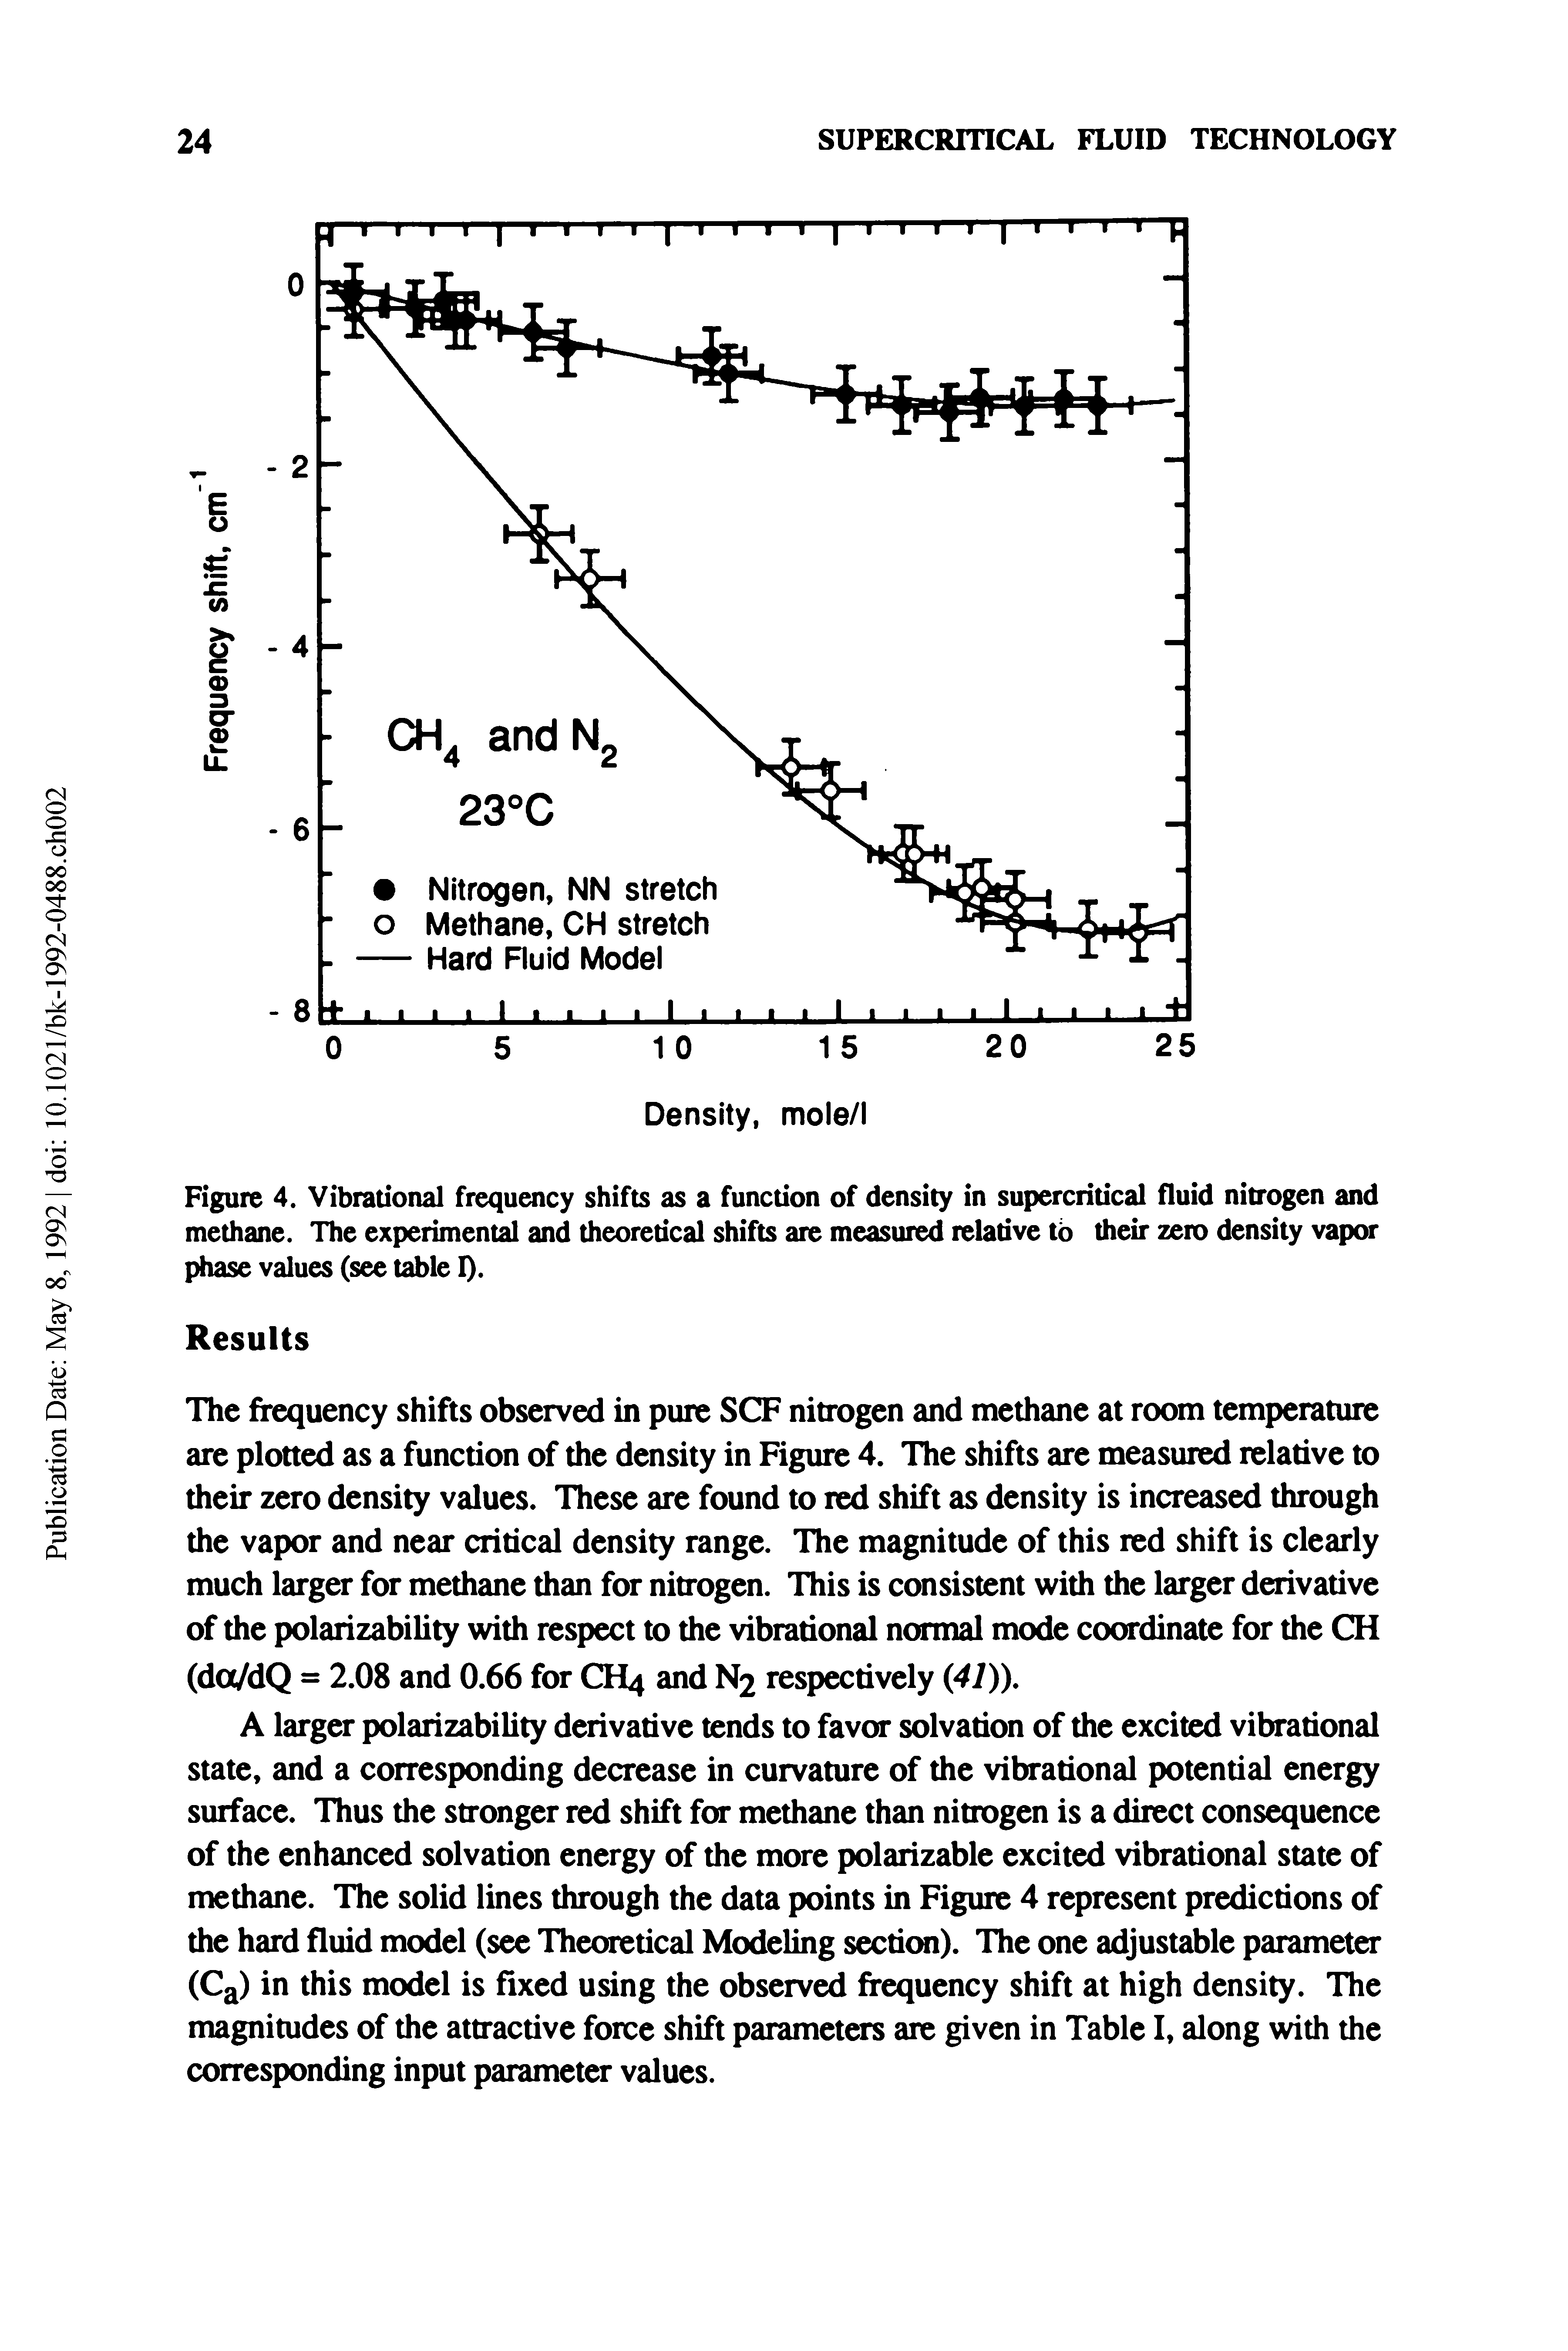 Figure 4. Vibrational frequency shifts as a function of density in supercritical fluid nitrogen and methane. The experimental and theoretical shifts are measured relative to their zero density vapor phase values (see table I).